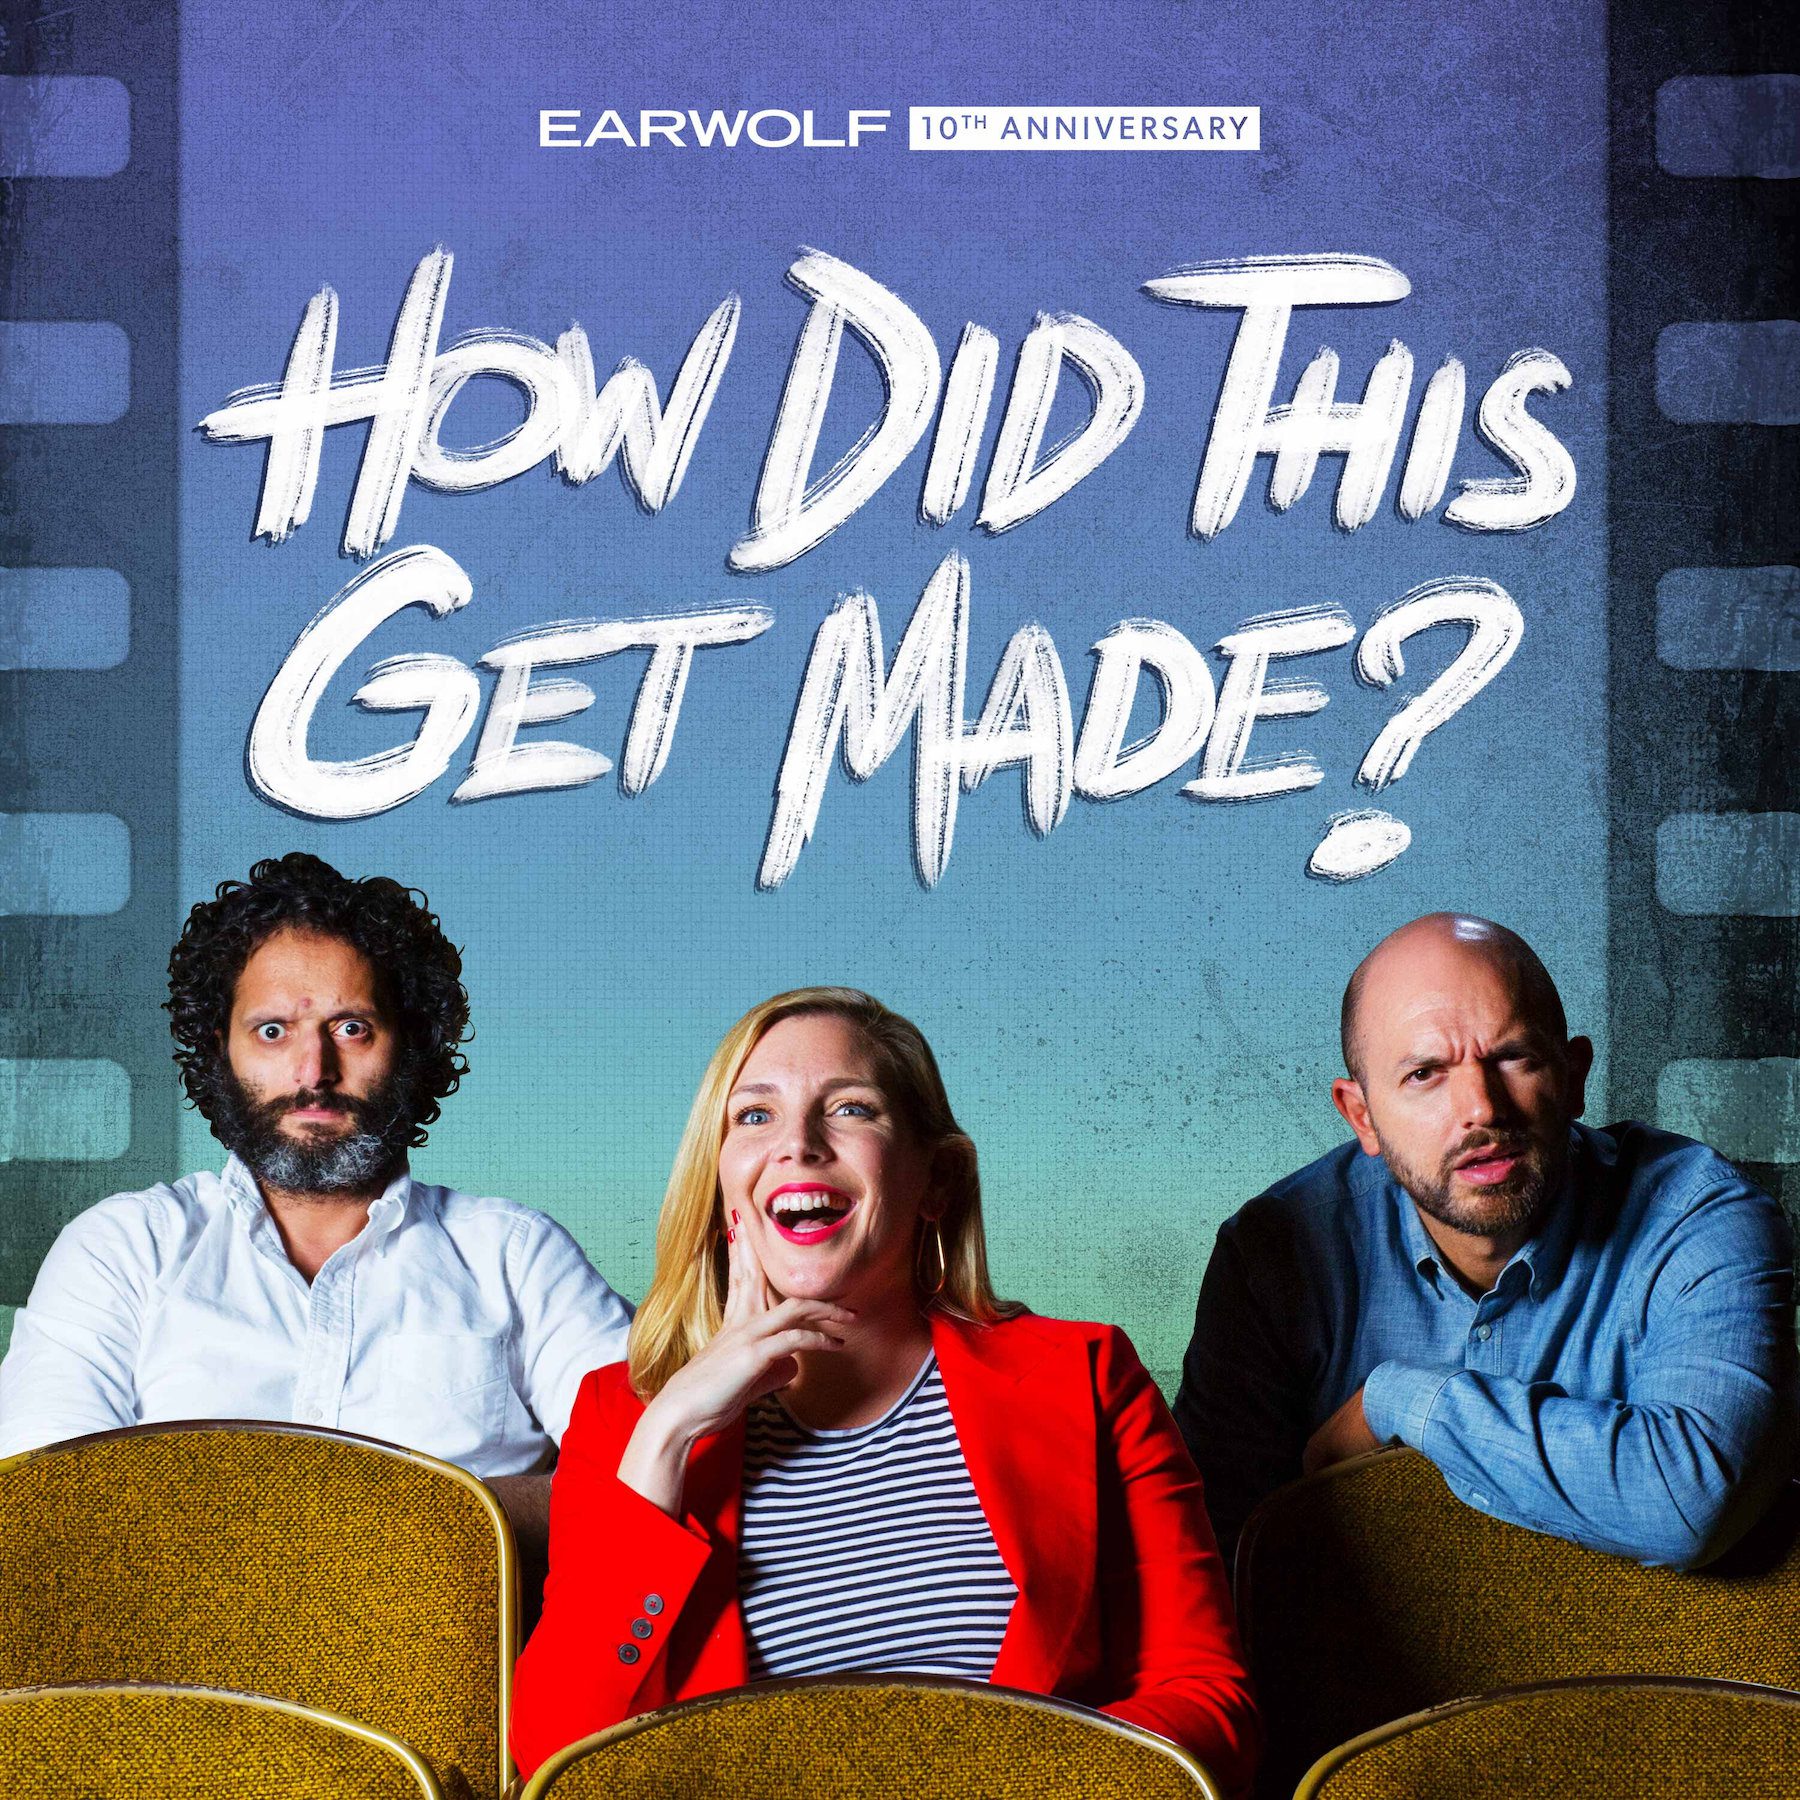 Artwork for How Did This Get Made featuring hosts against blue background sitting in movie theater seats.